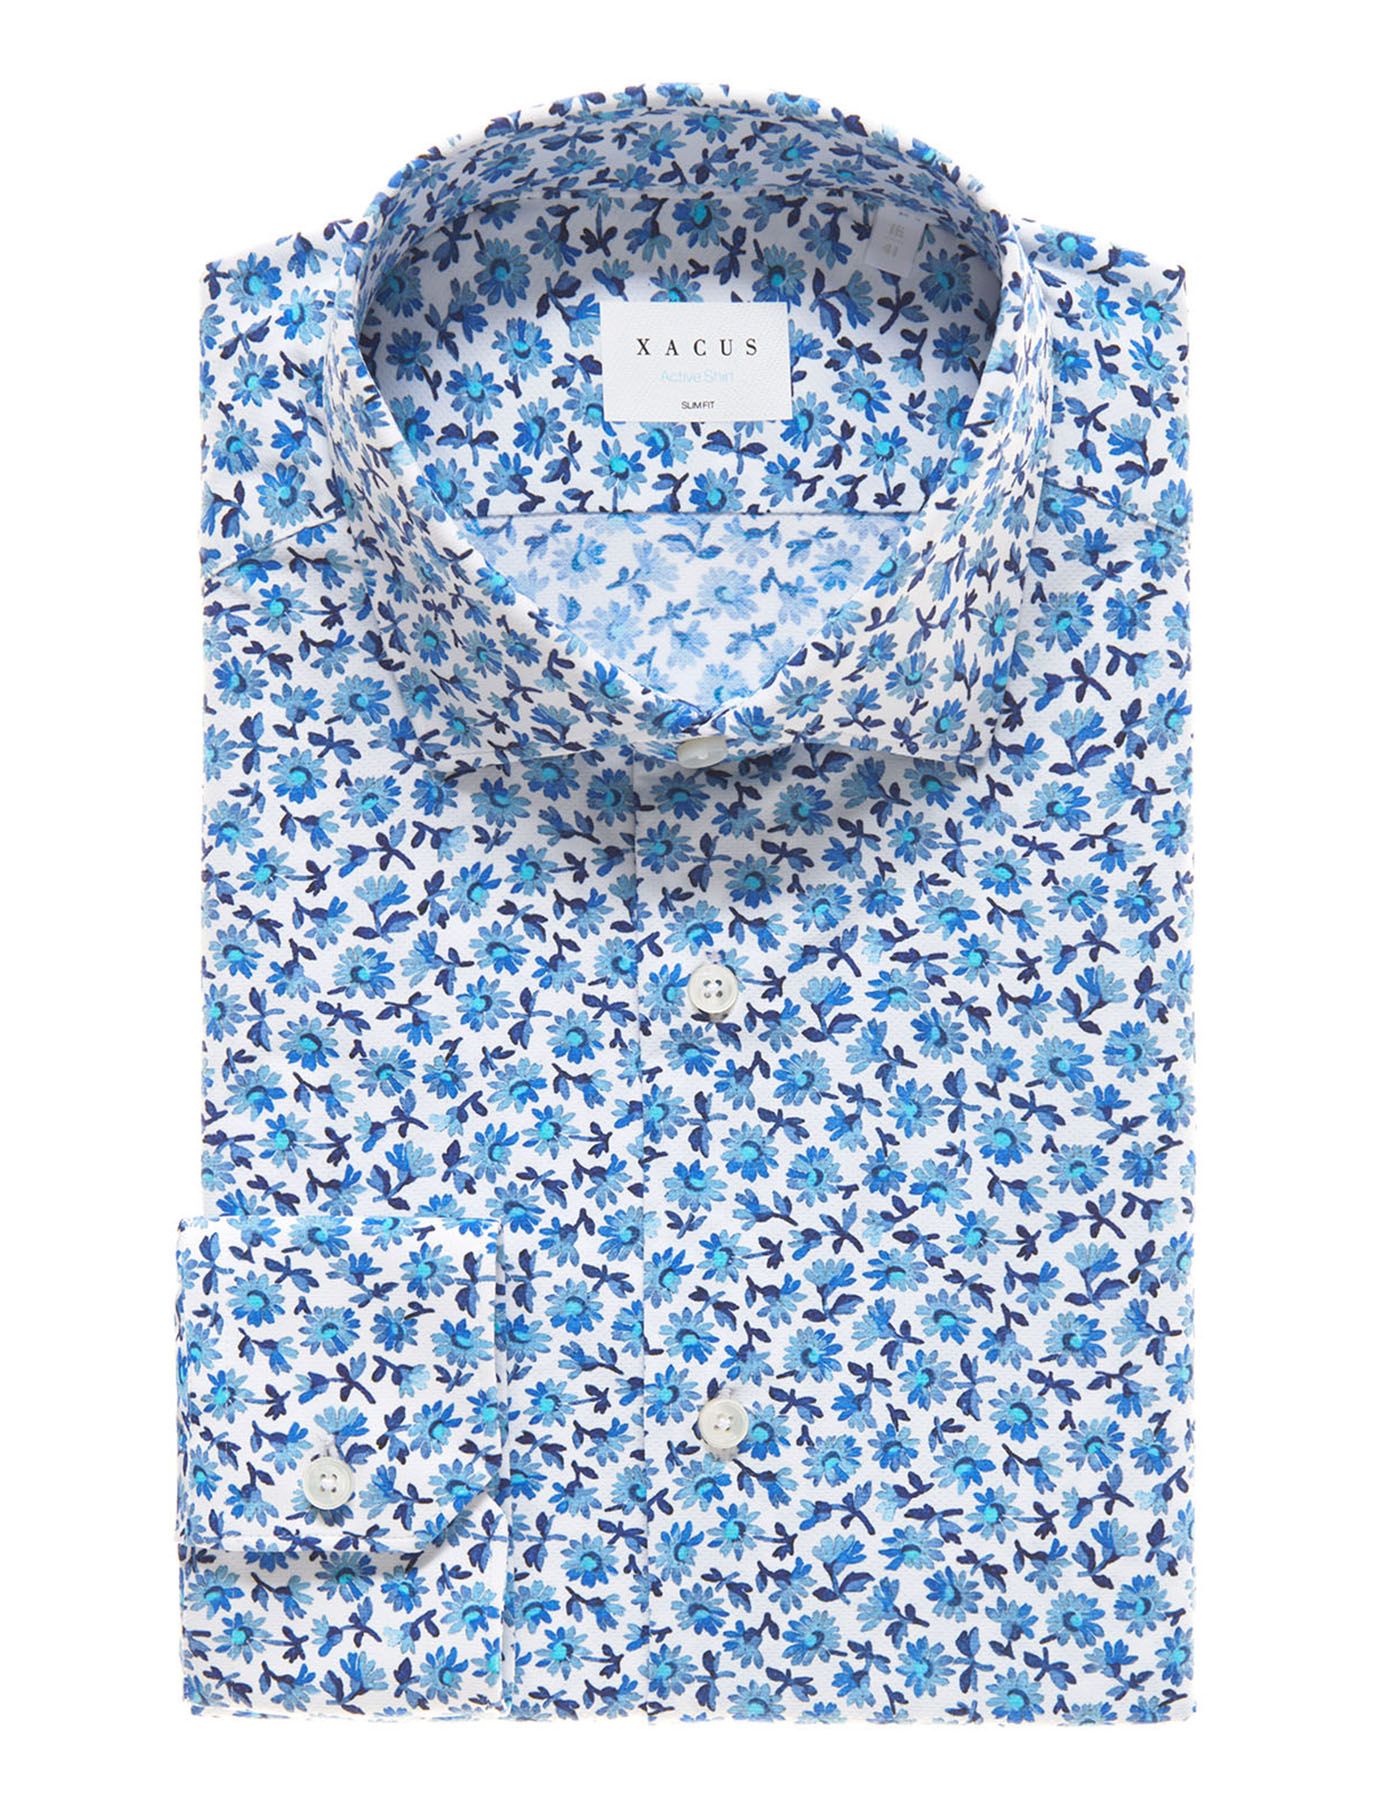 Xacus tailor fit shirt in white/blue spiral print